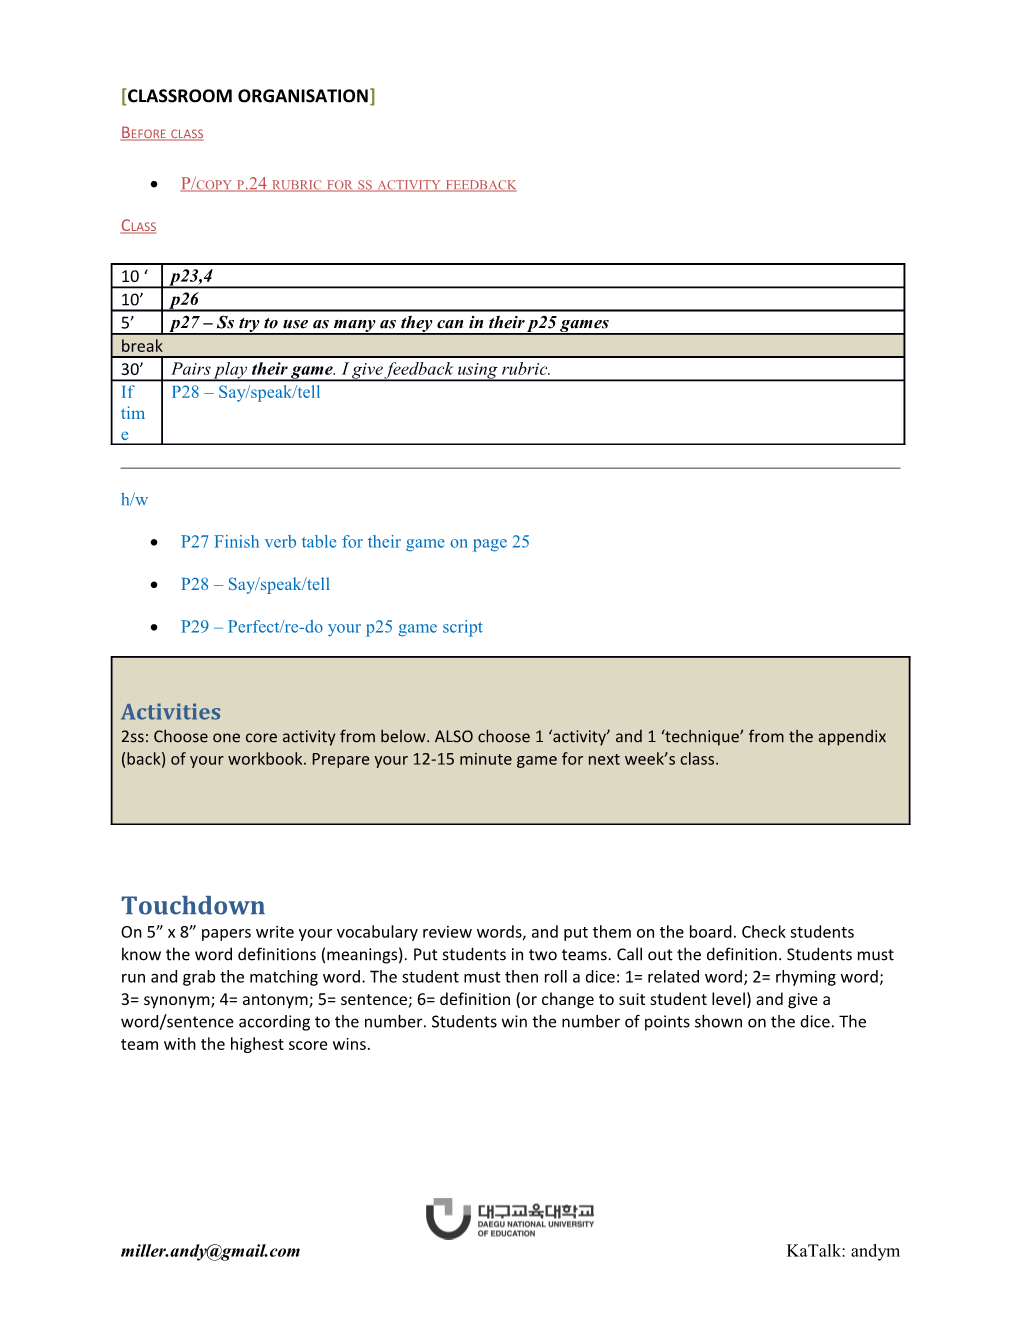 P/Copy P.24 Rubric for Ss Activity Feedback